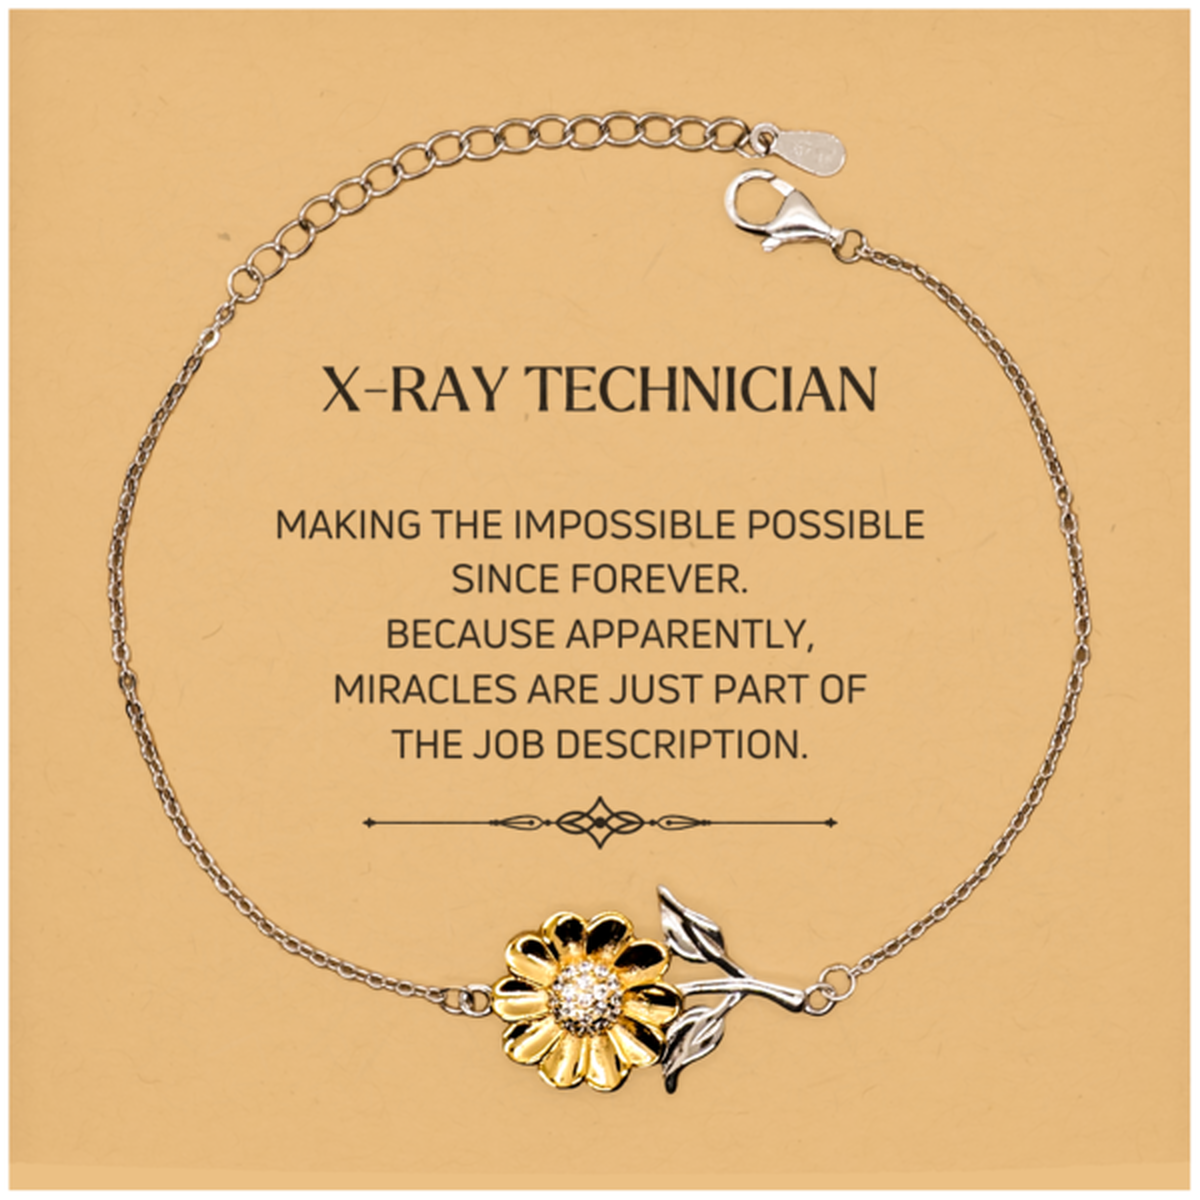 Funny X-Ray Technician Gifts, Miracles are just part of the job description, Inspirational Birthday Christmas Sunflower Bracelet For X-Ray Technician, Men, Women, Coworkers, Friends, Boss